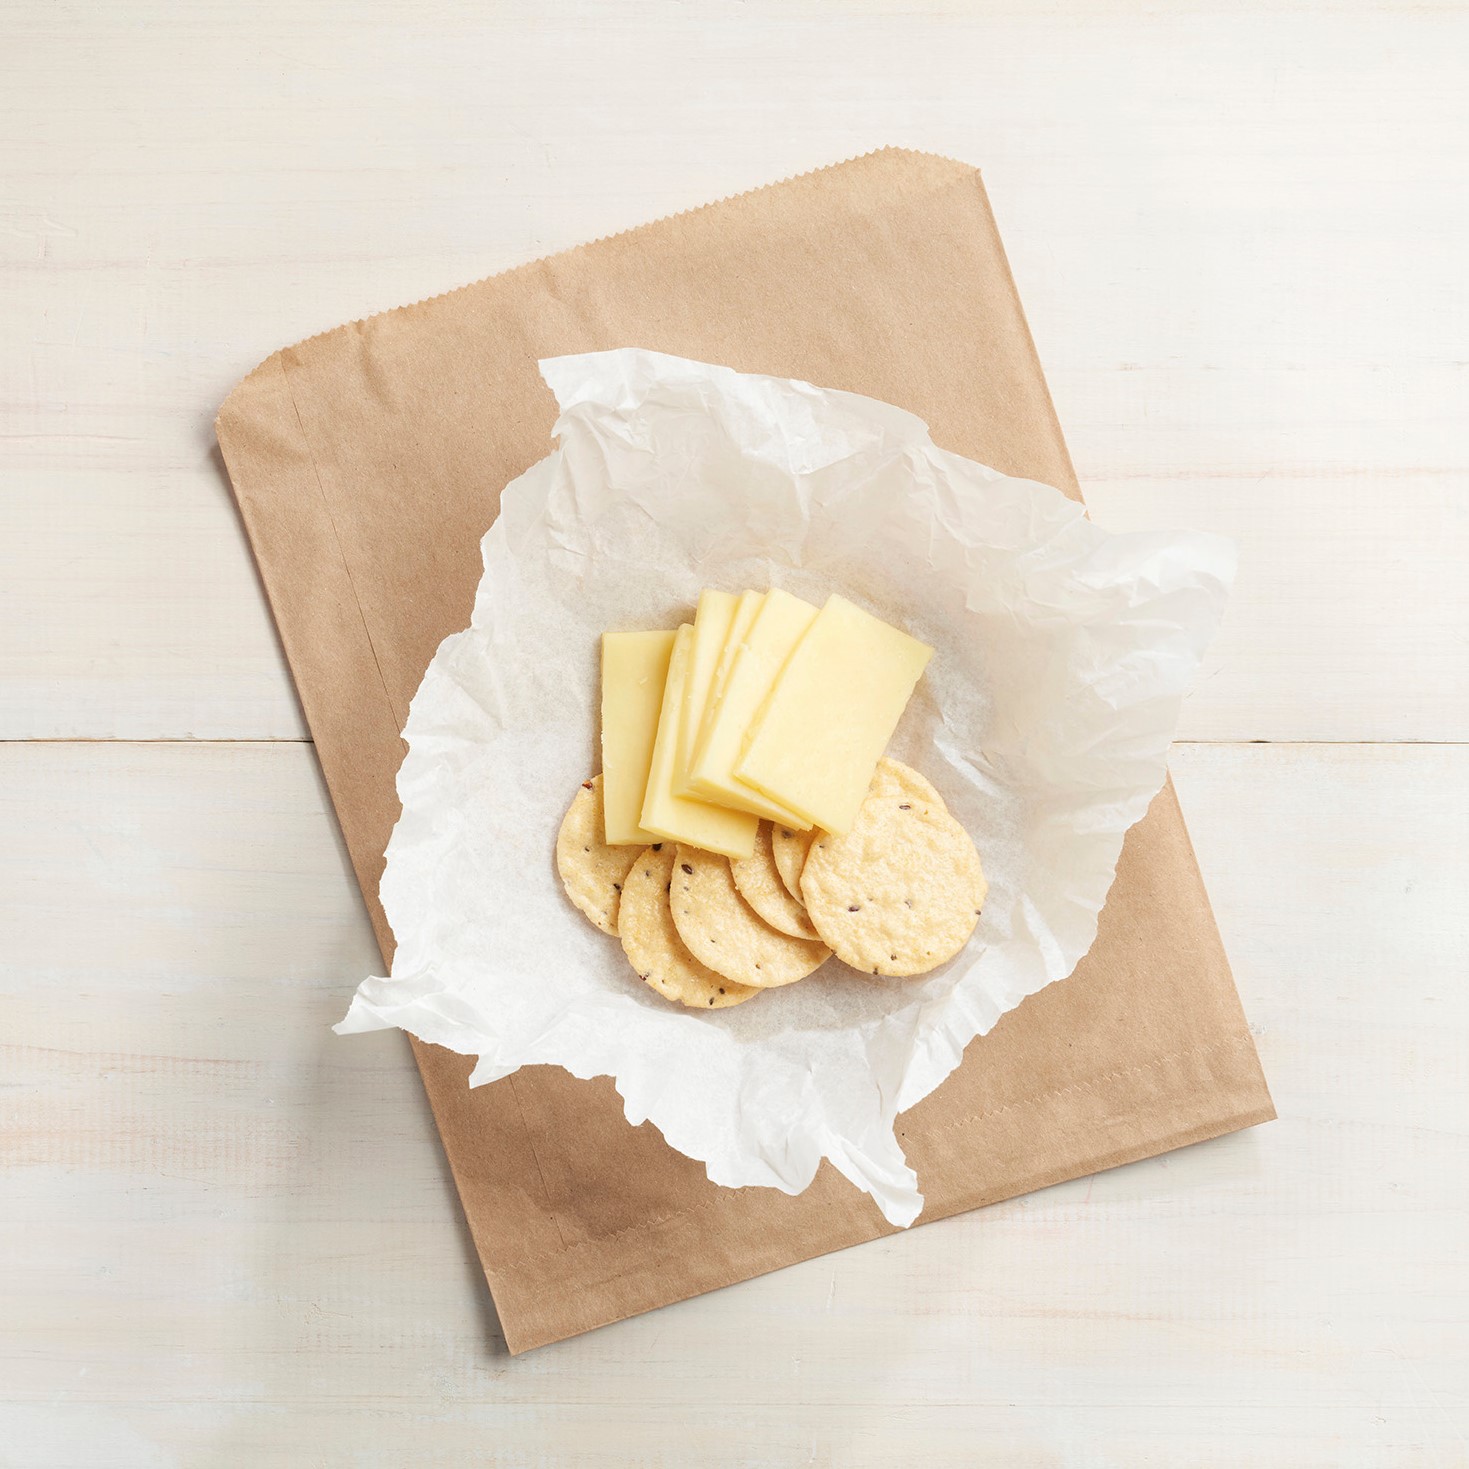 Cheese & crackers on brown paper